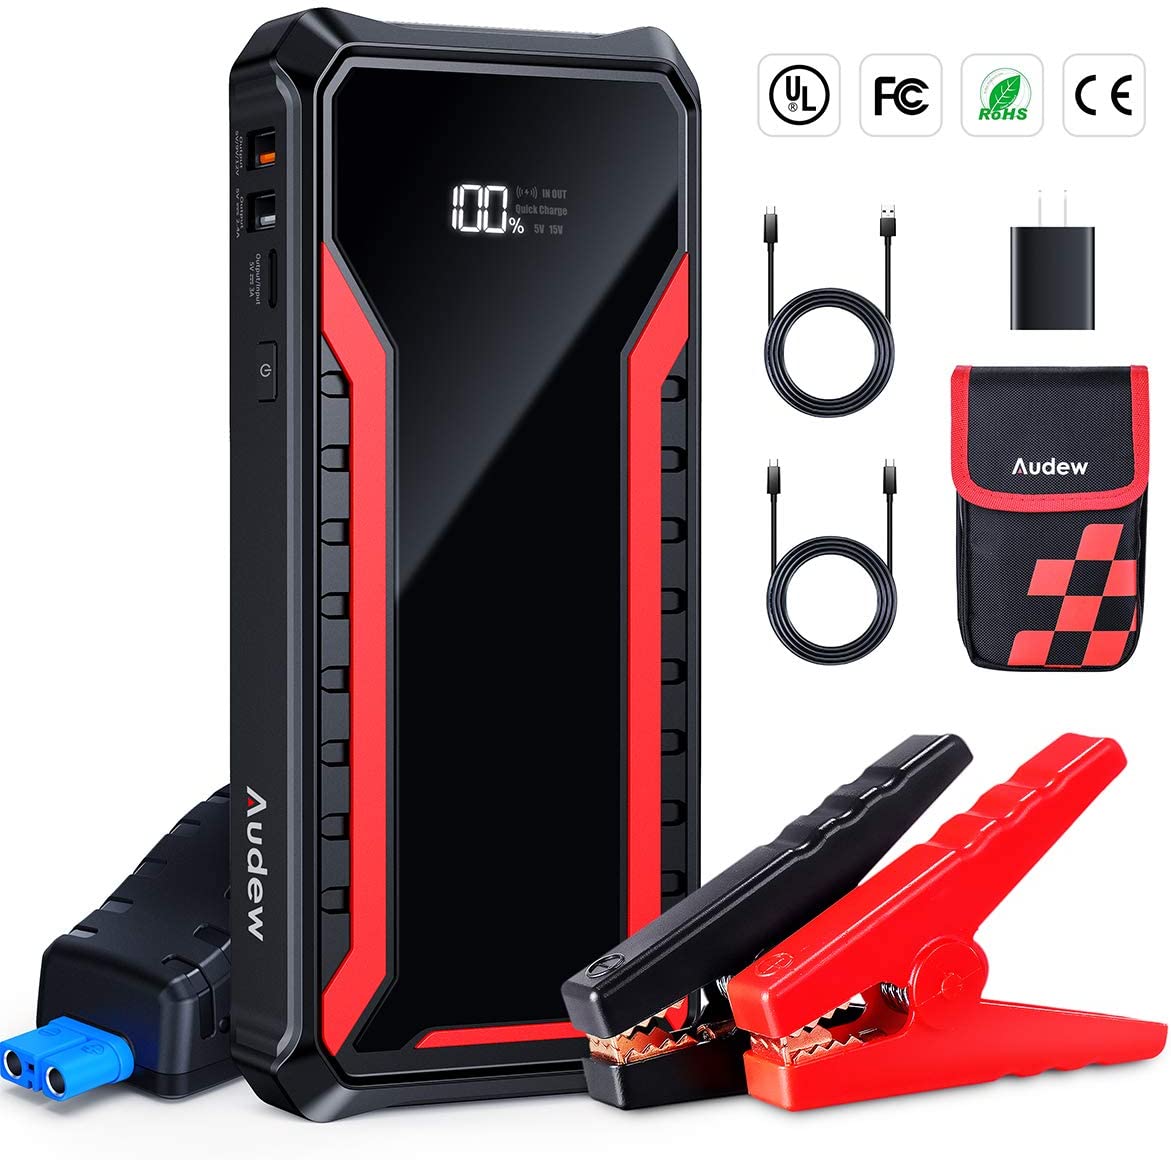 Audew 1500 Amp 18000mAh Car Battery Jump Starter with 15W Wireless Charging and USB Type-C - $55.99